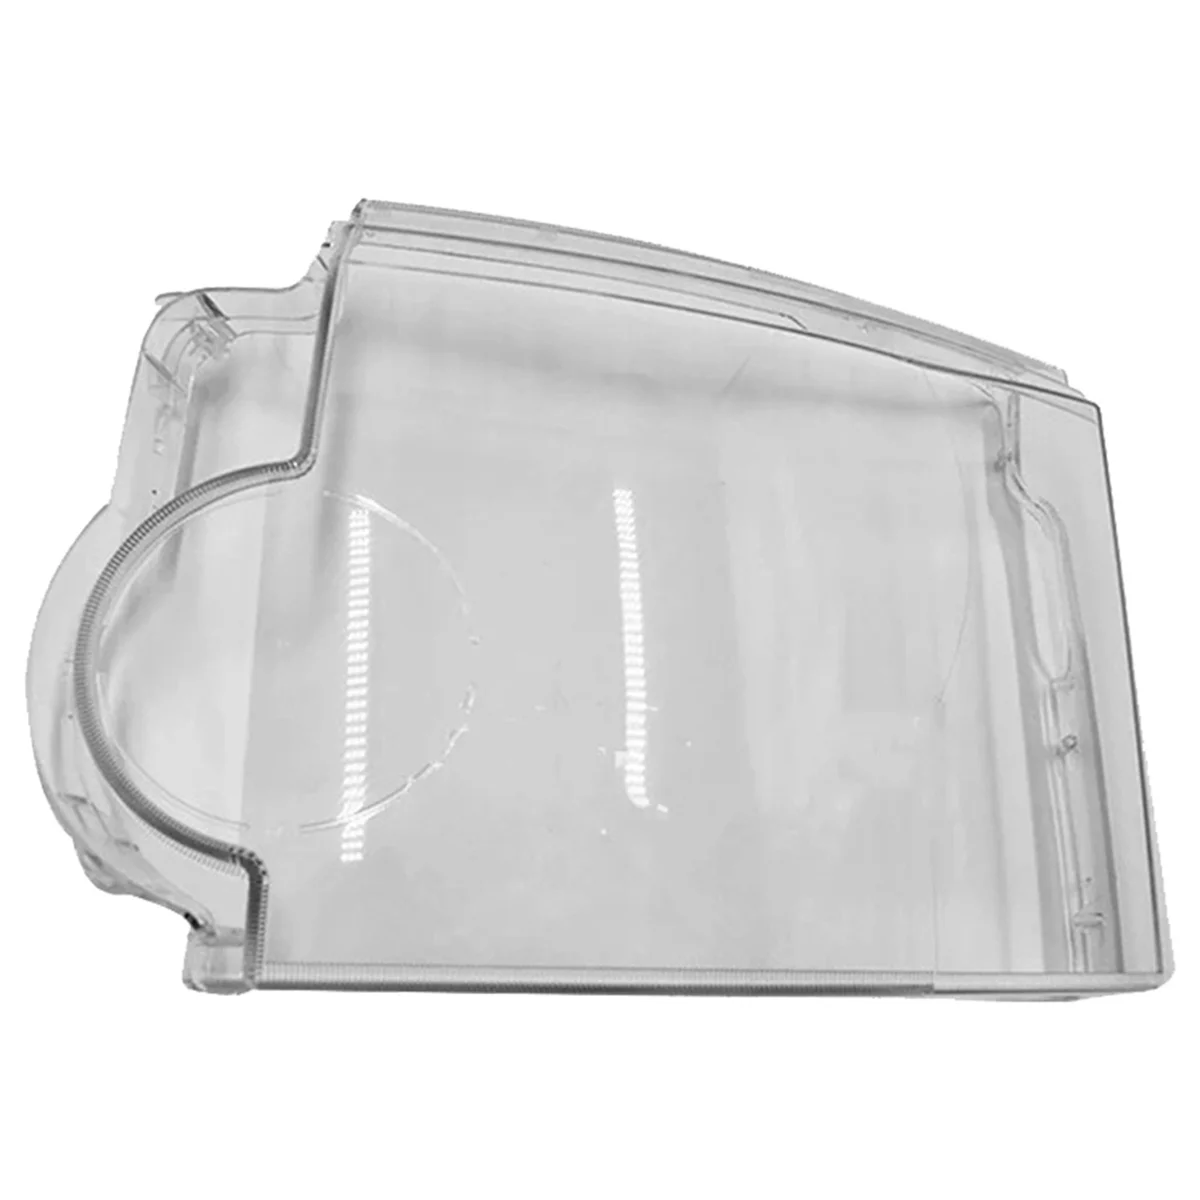 

Left Headlight Cover for Land Rover Discovery 3 LR3 2006-2009 Car Head Light Lamp Lens Replacement